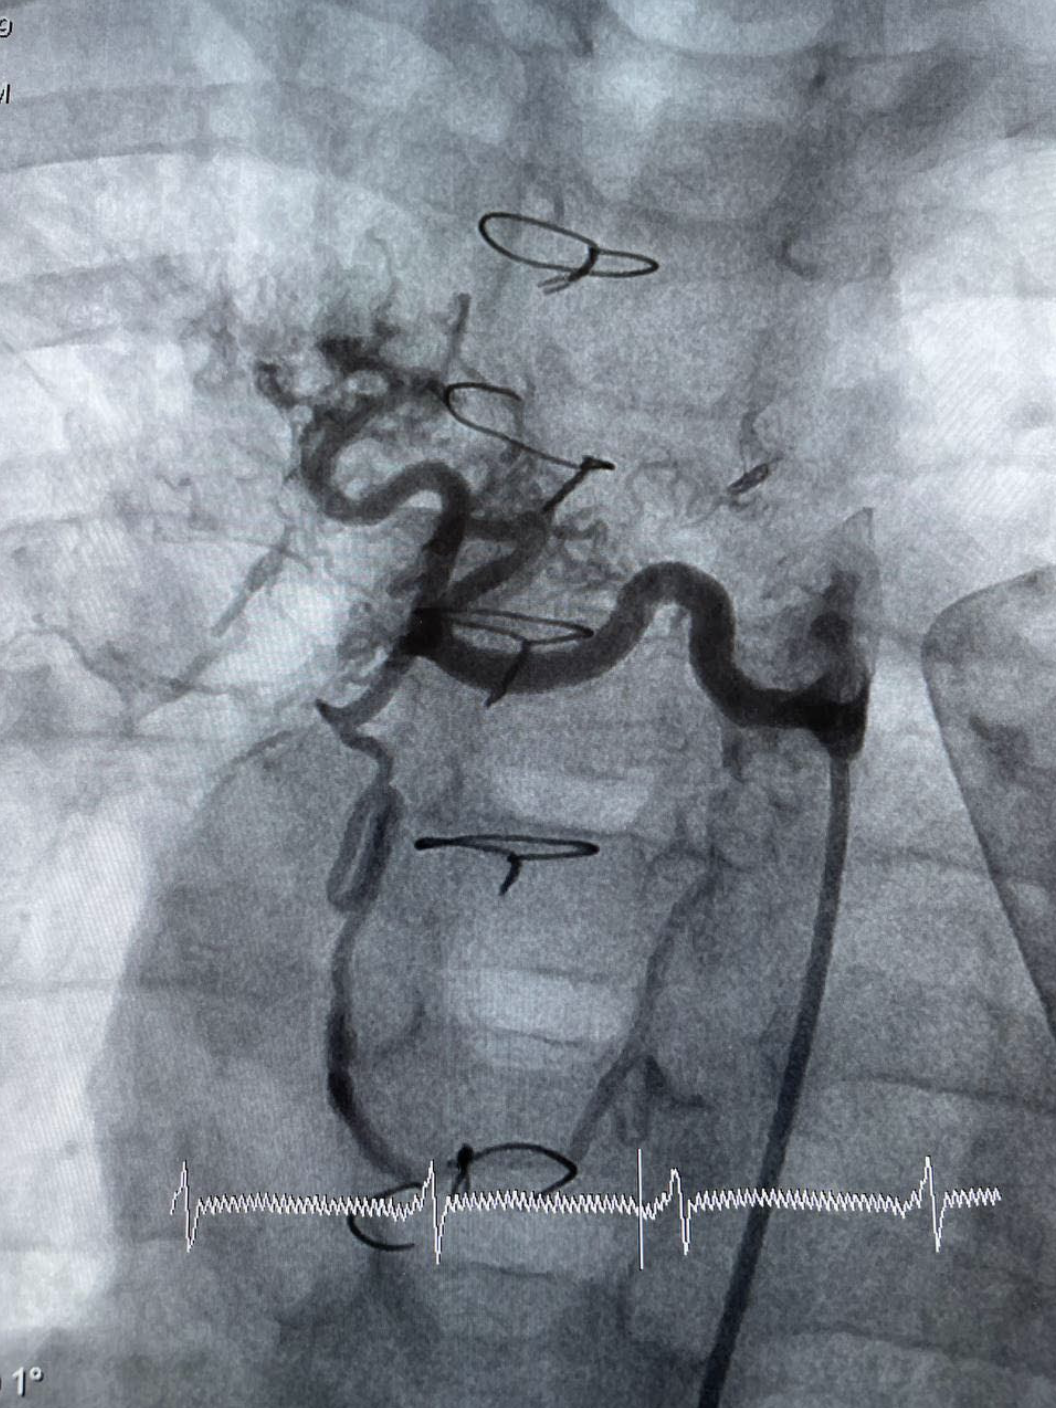 This image is showing a successfully implanted stent